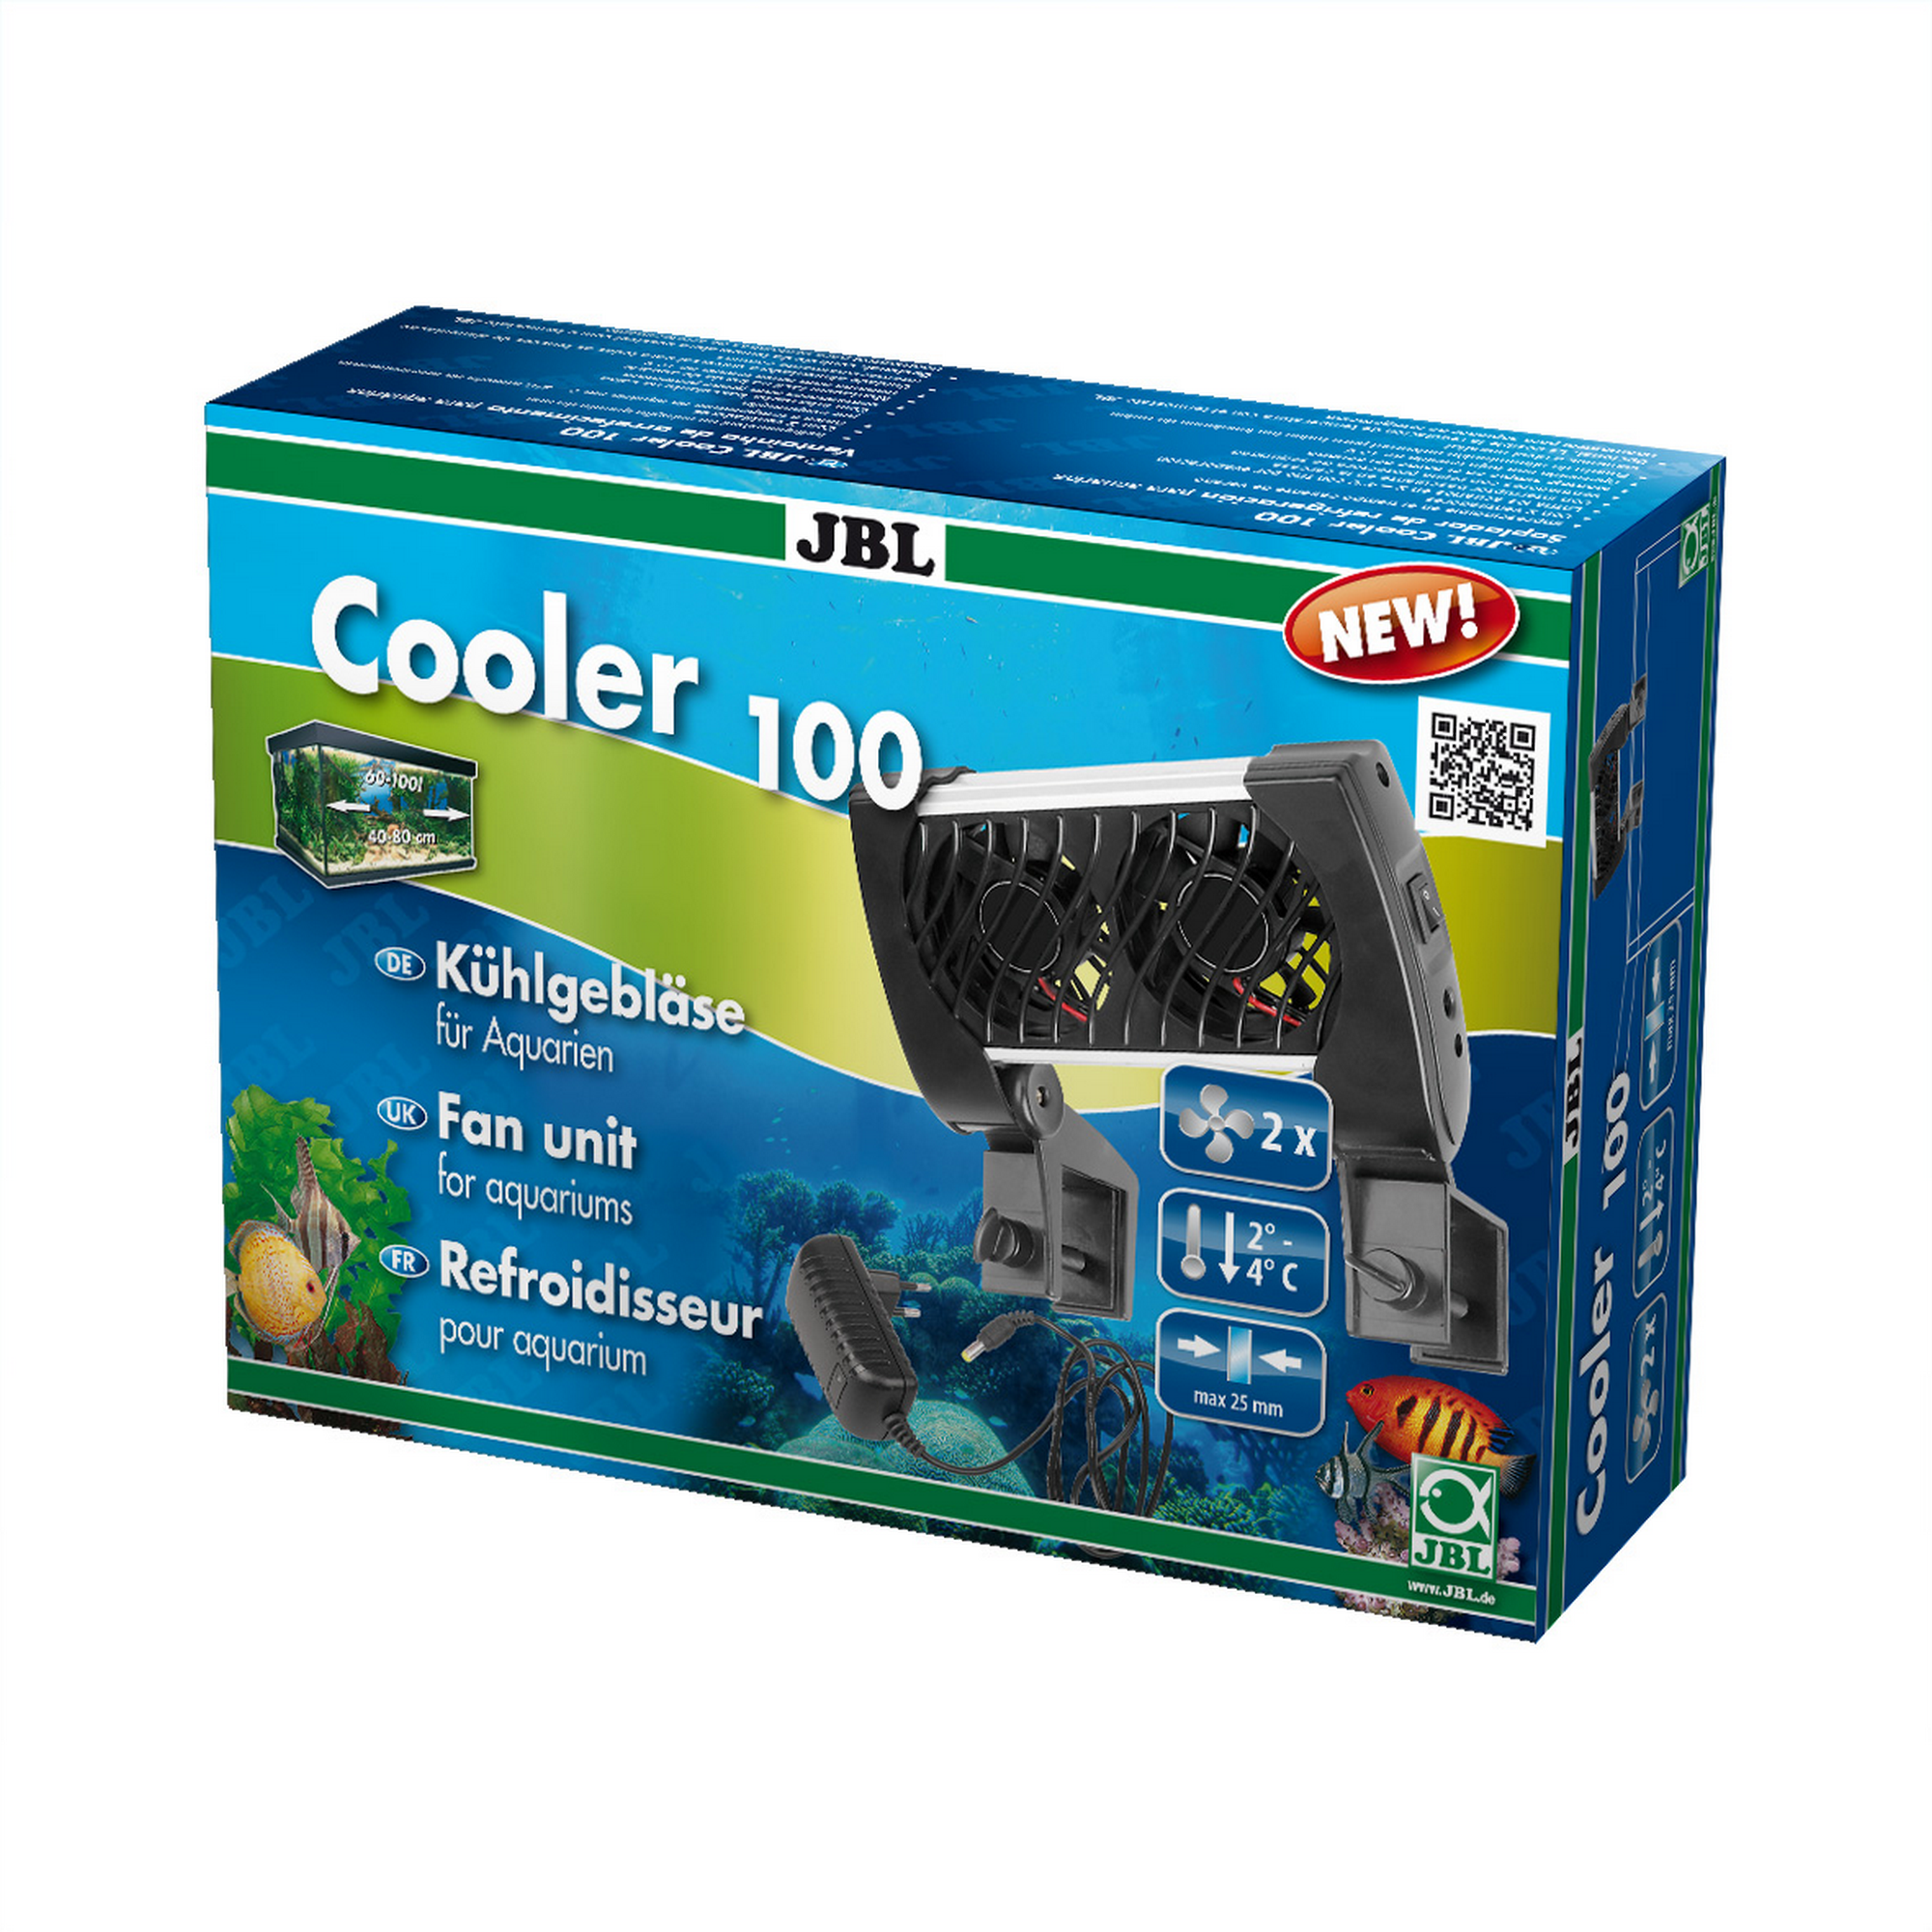 Cooler 100 + product picture